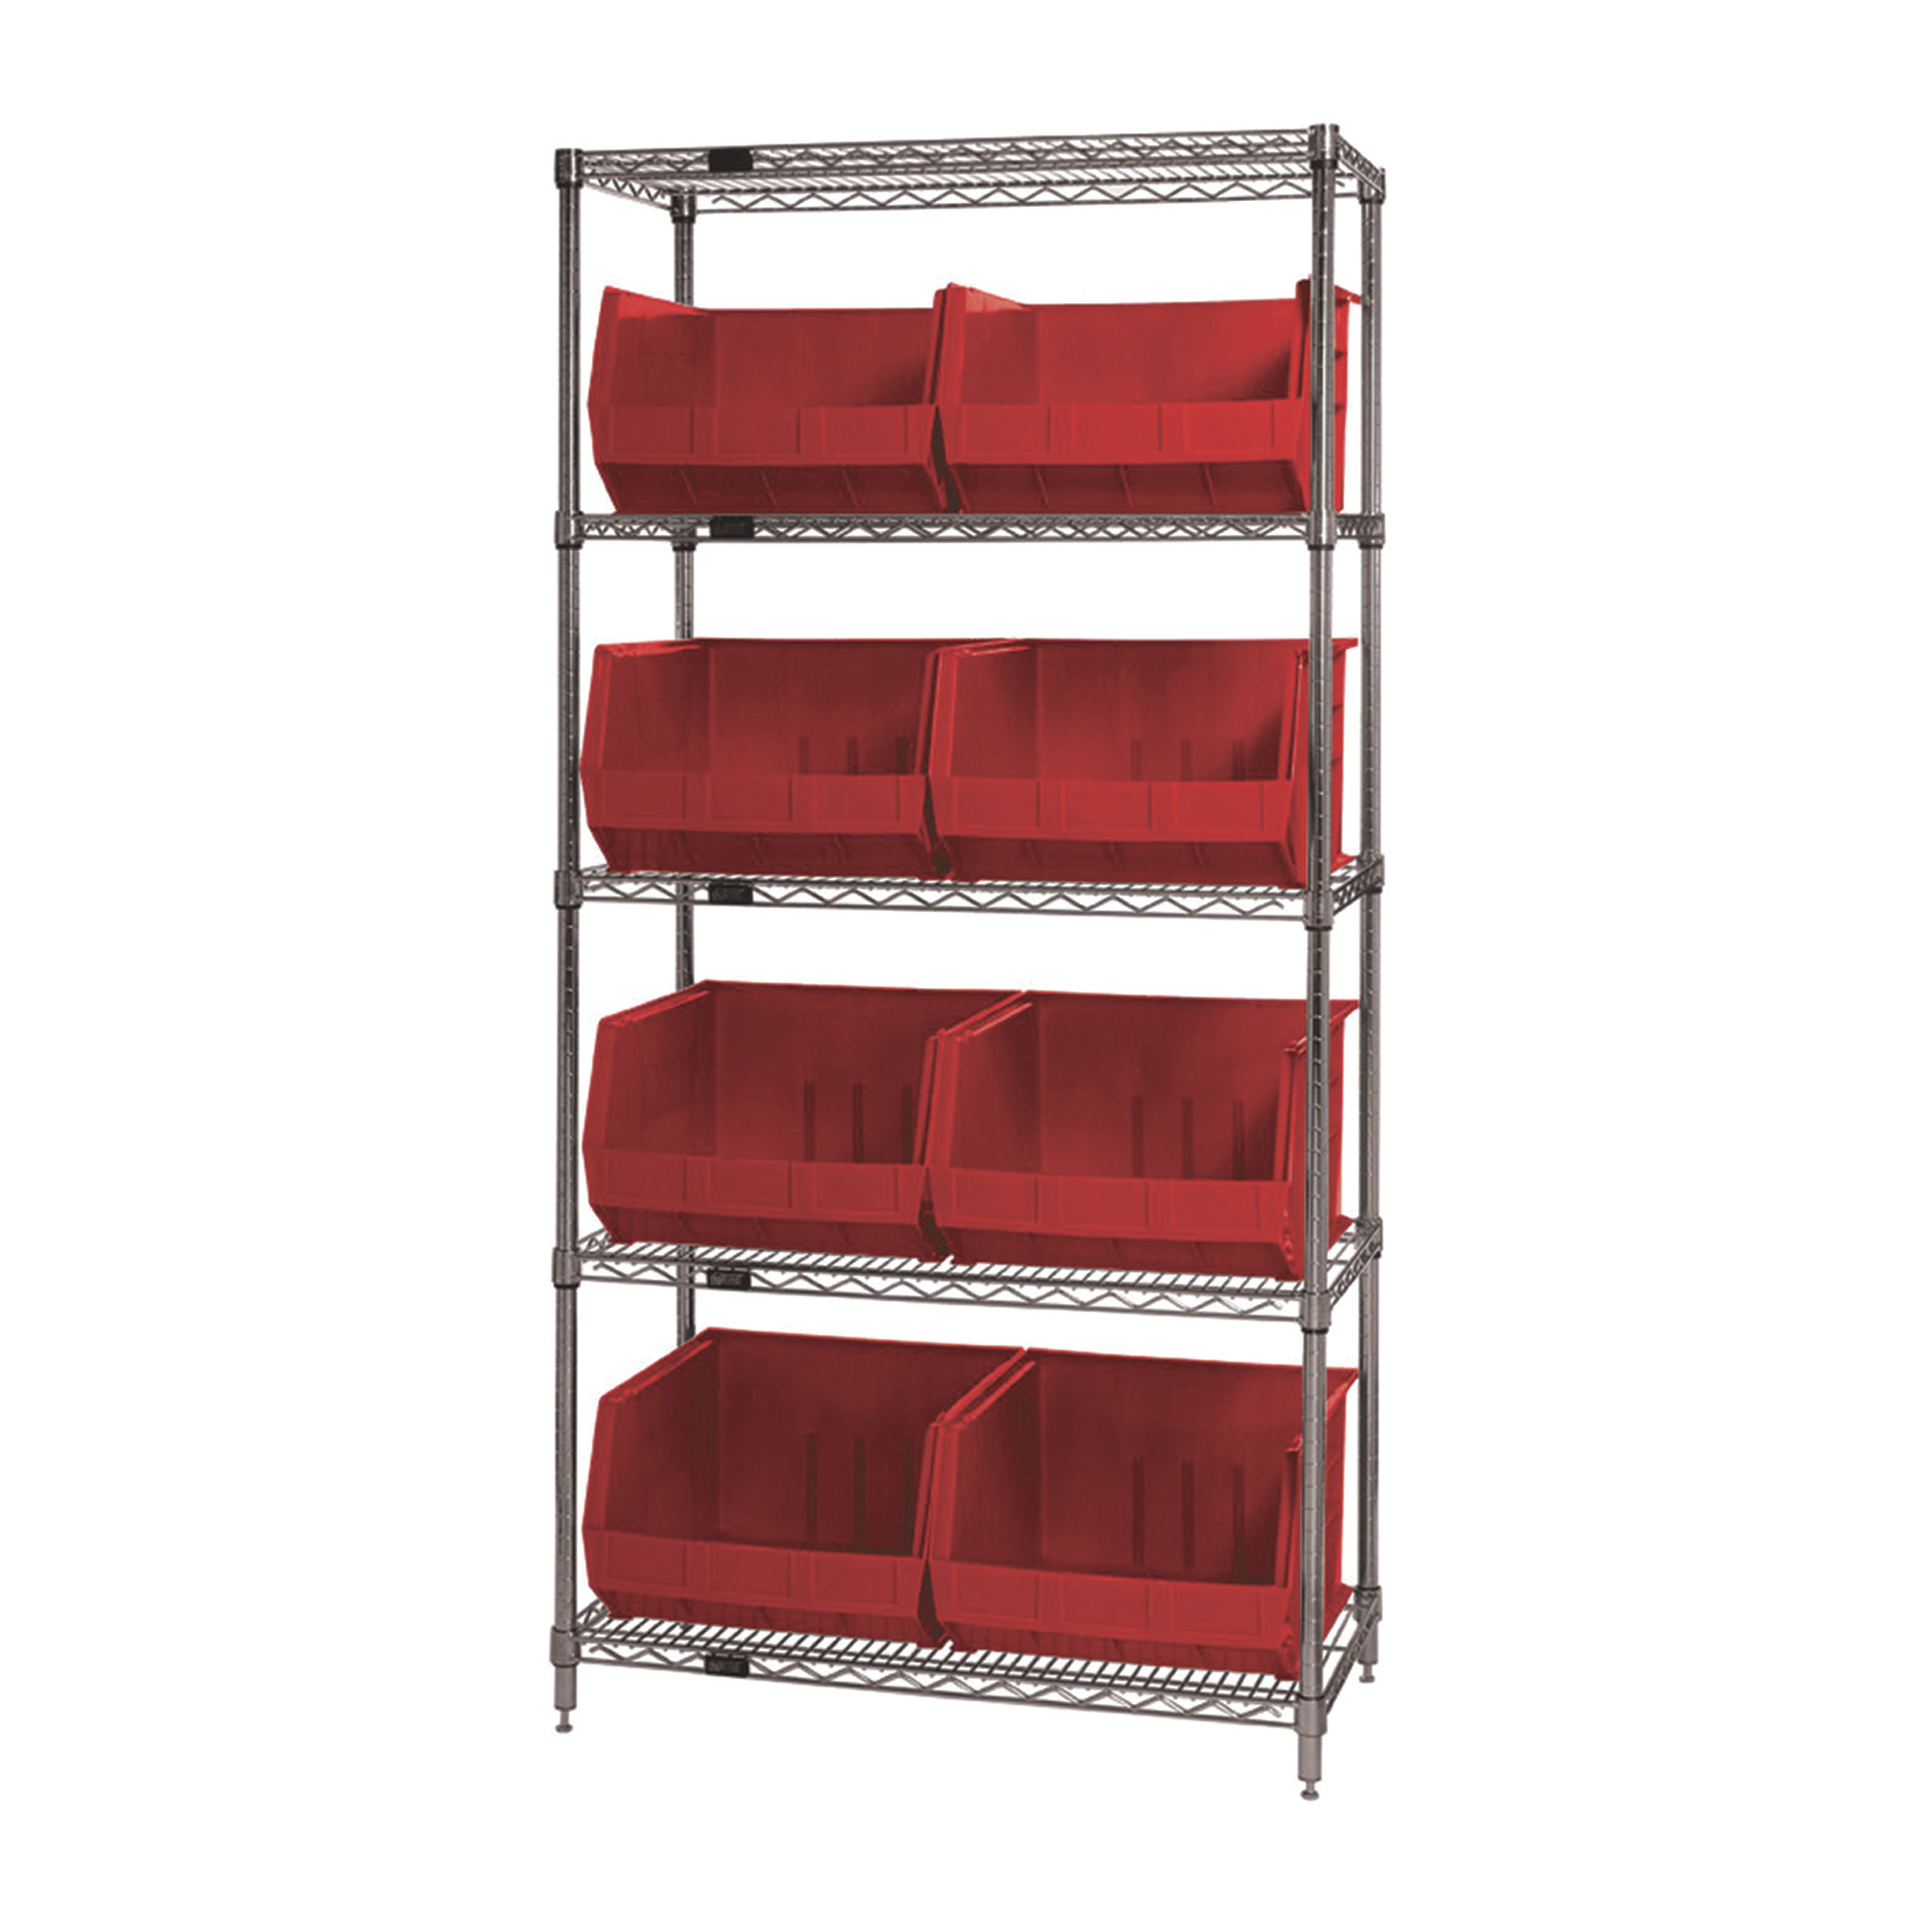 Storage Single Side Wire Chrome Shelving Unit with 8 Ultra Bins — 18Inch L x 36Inch W x 74Inch H, Red, Model - Quantum WR5-270RD